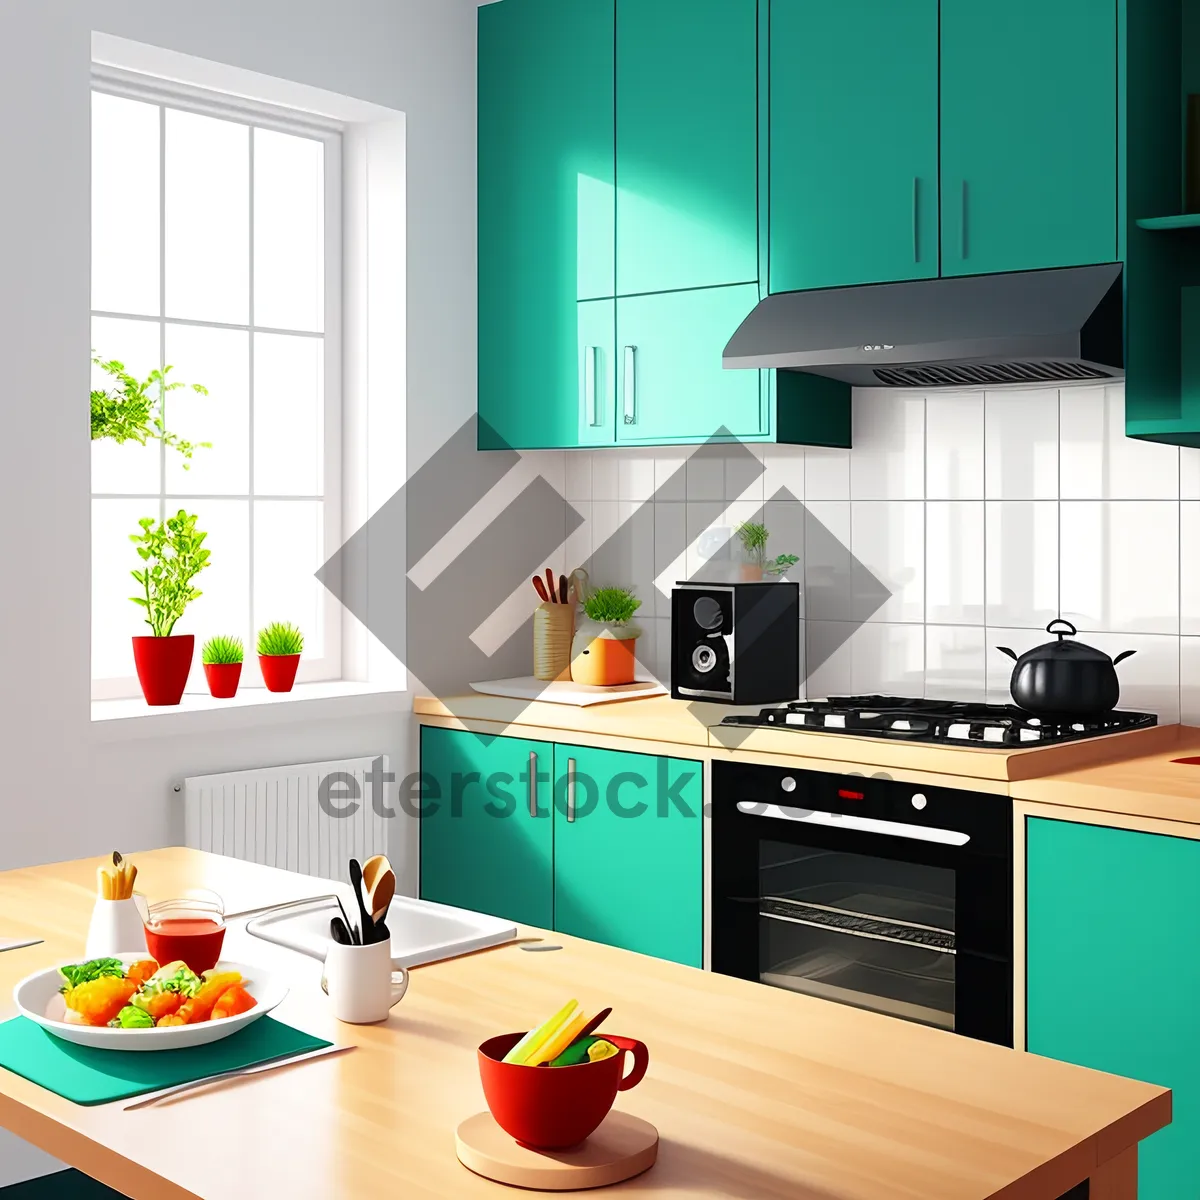 Picture of The Interior of a Modern Kitchen is Enhanced by Trendy Green Furniture and Appliances